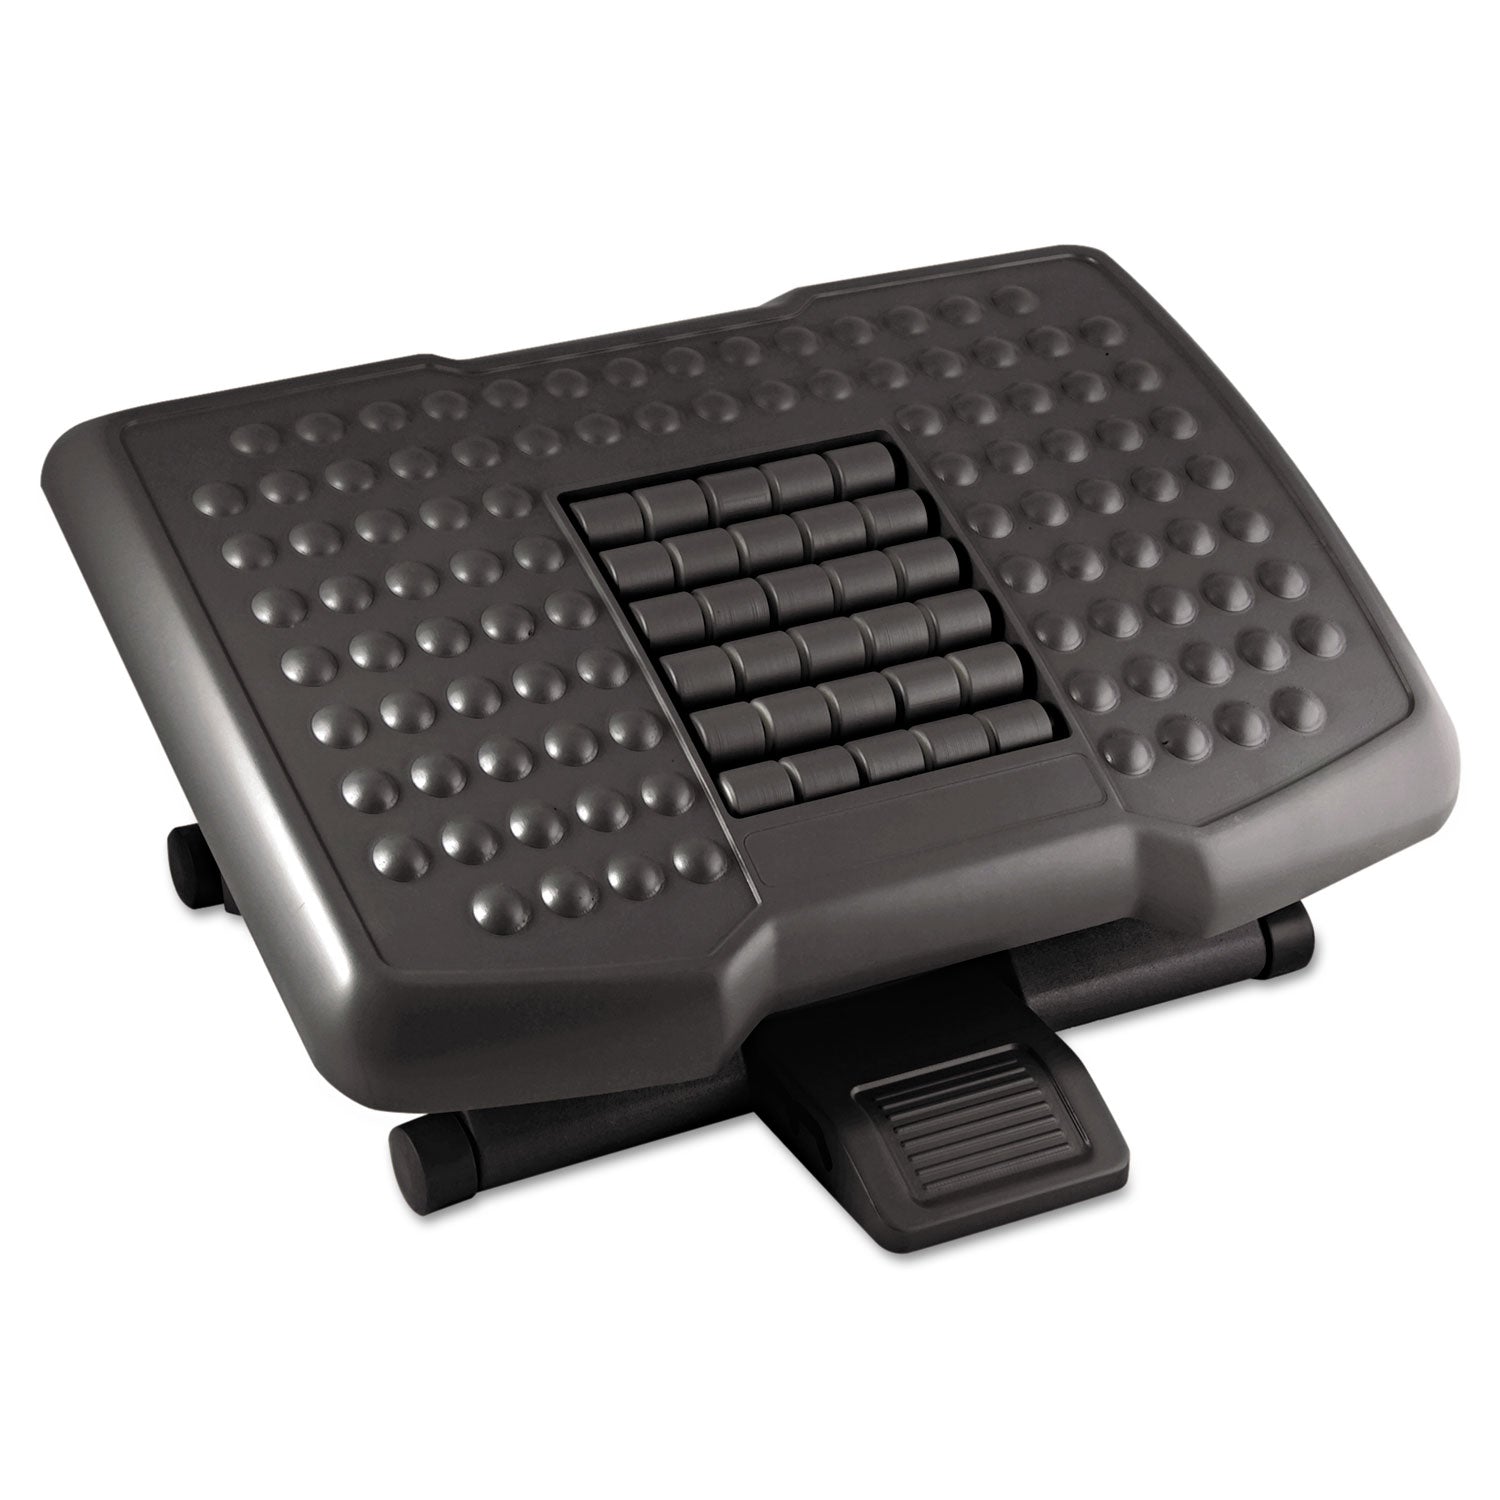 premium-adjustable-footrest-with-rollers-plastic-18w-x-13d-x-4-to-65h-black_ktkfr750 - 1